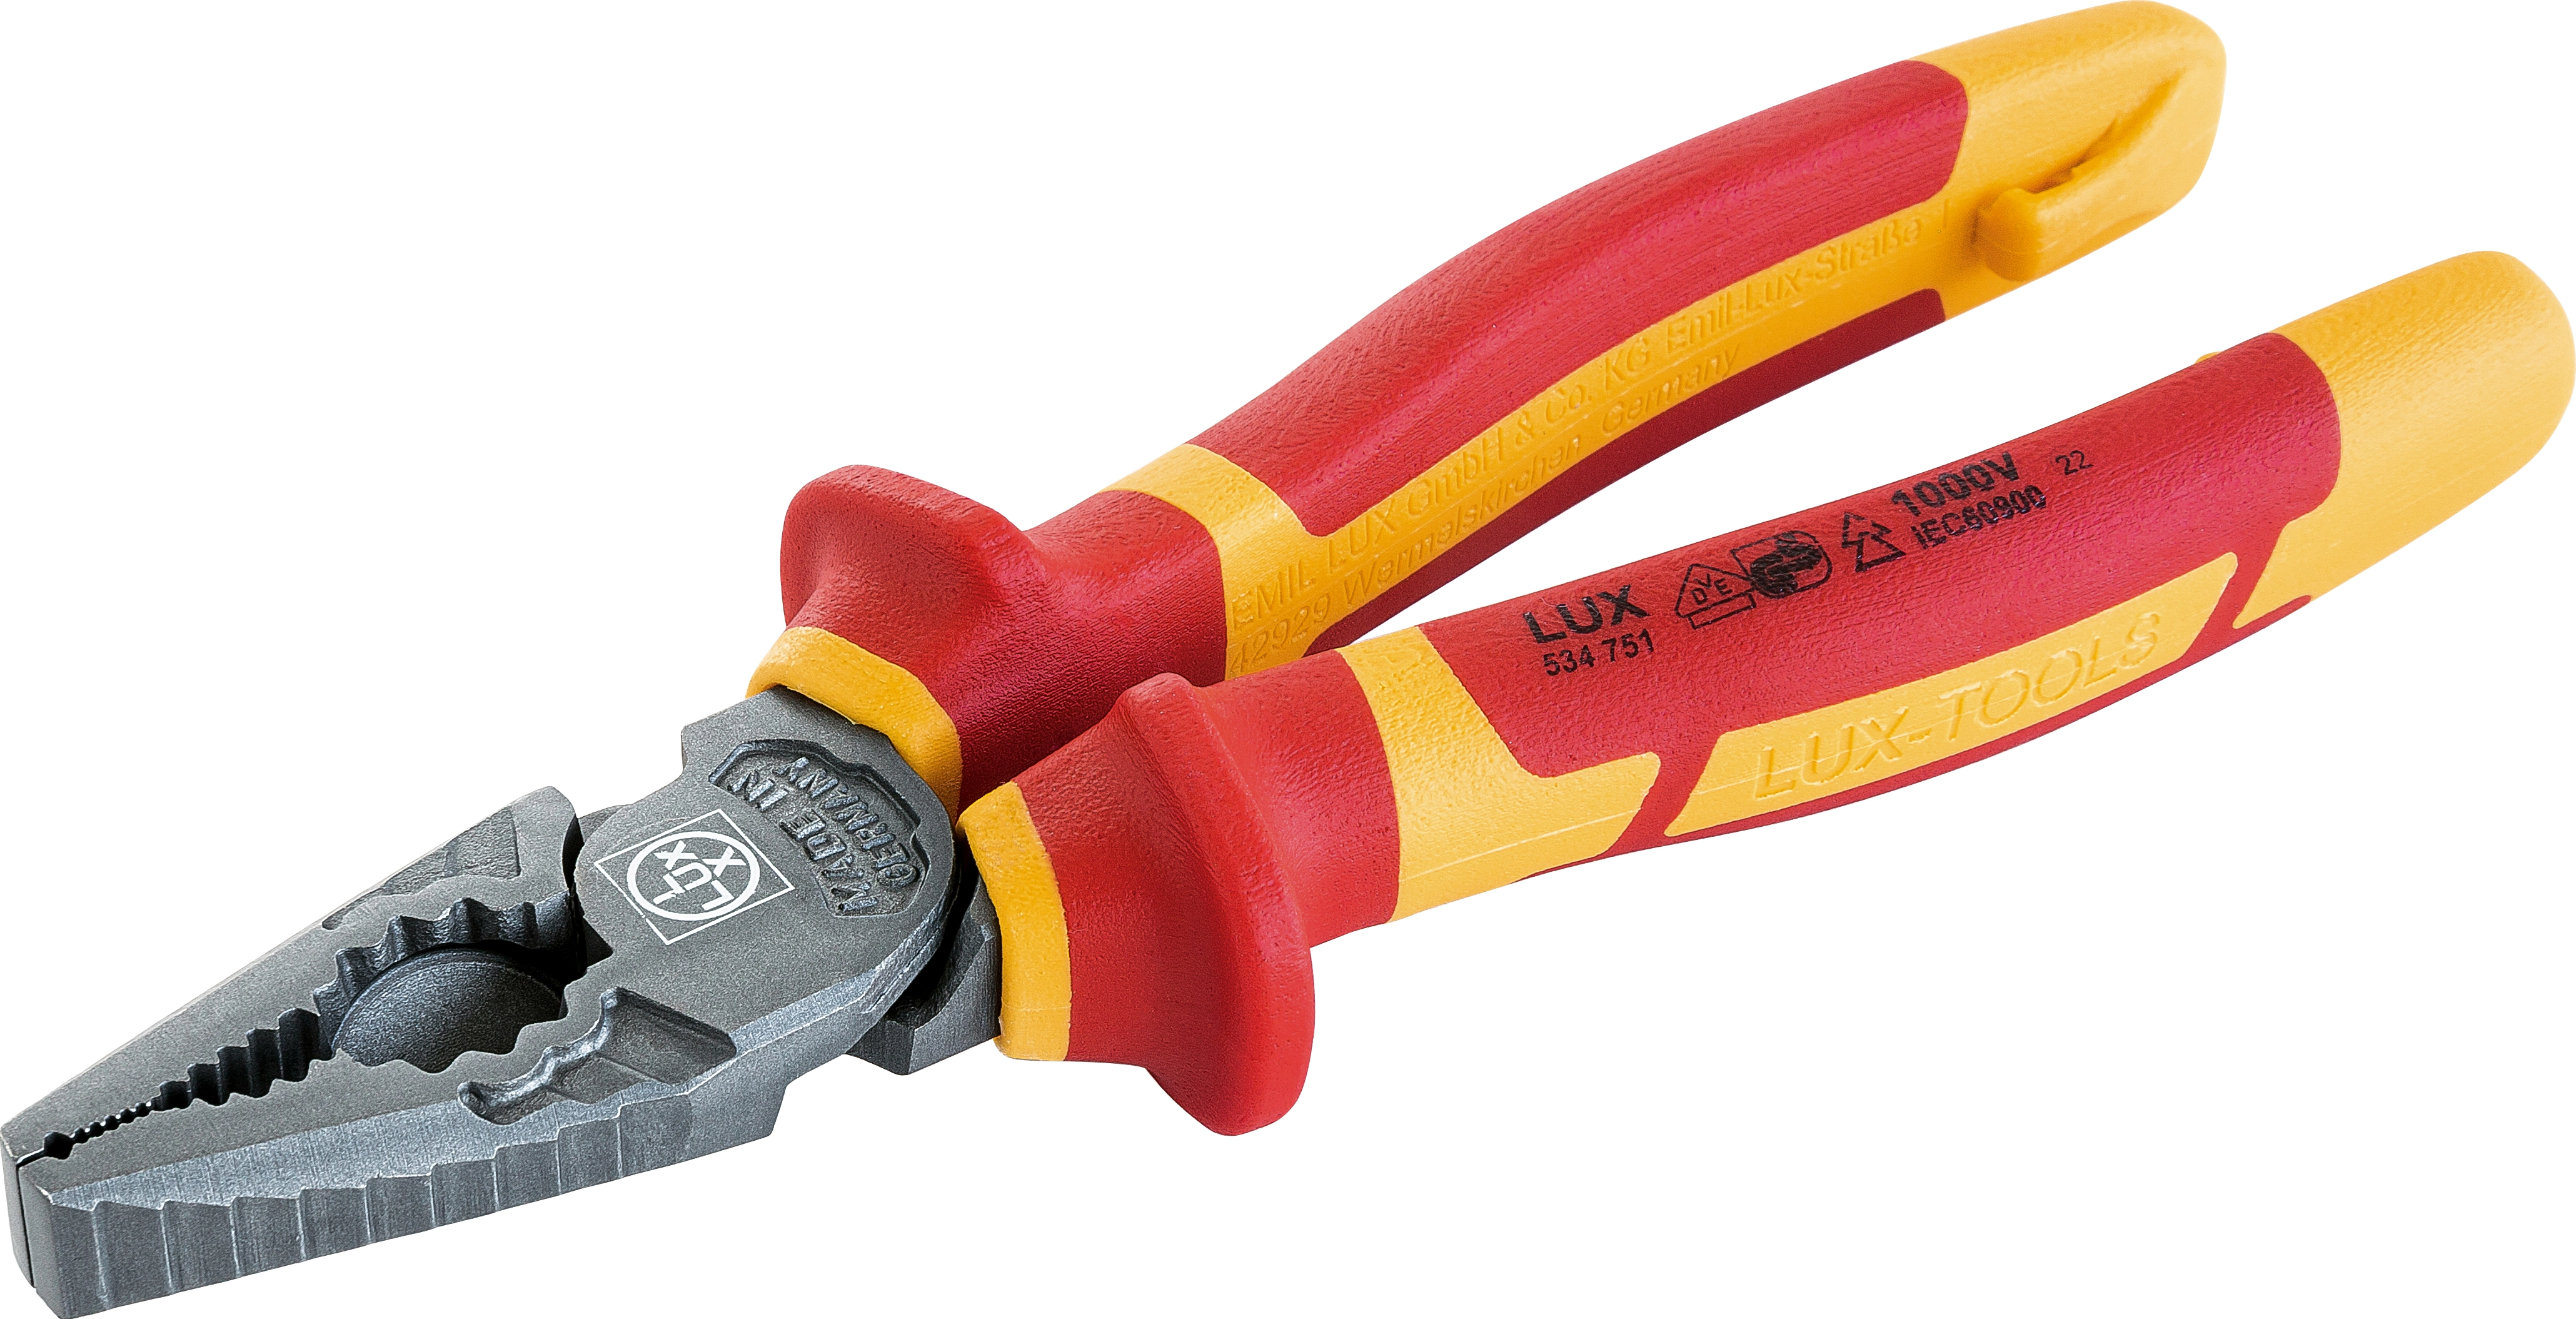 Knipex pince universelle corde à piano VDE